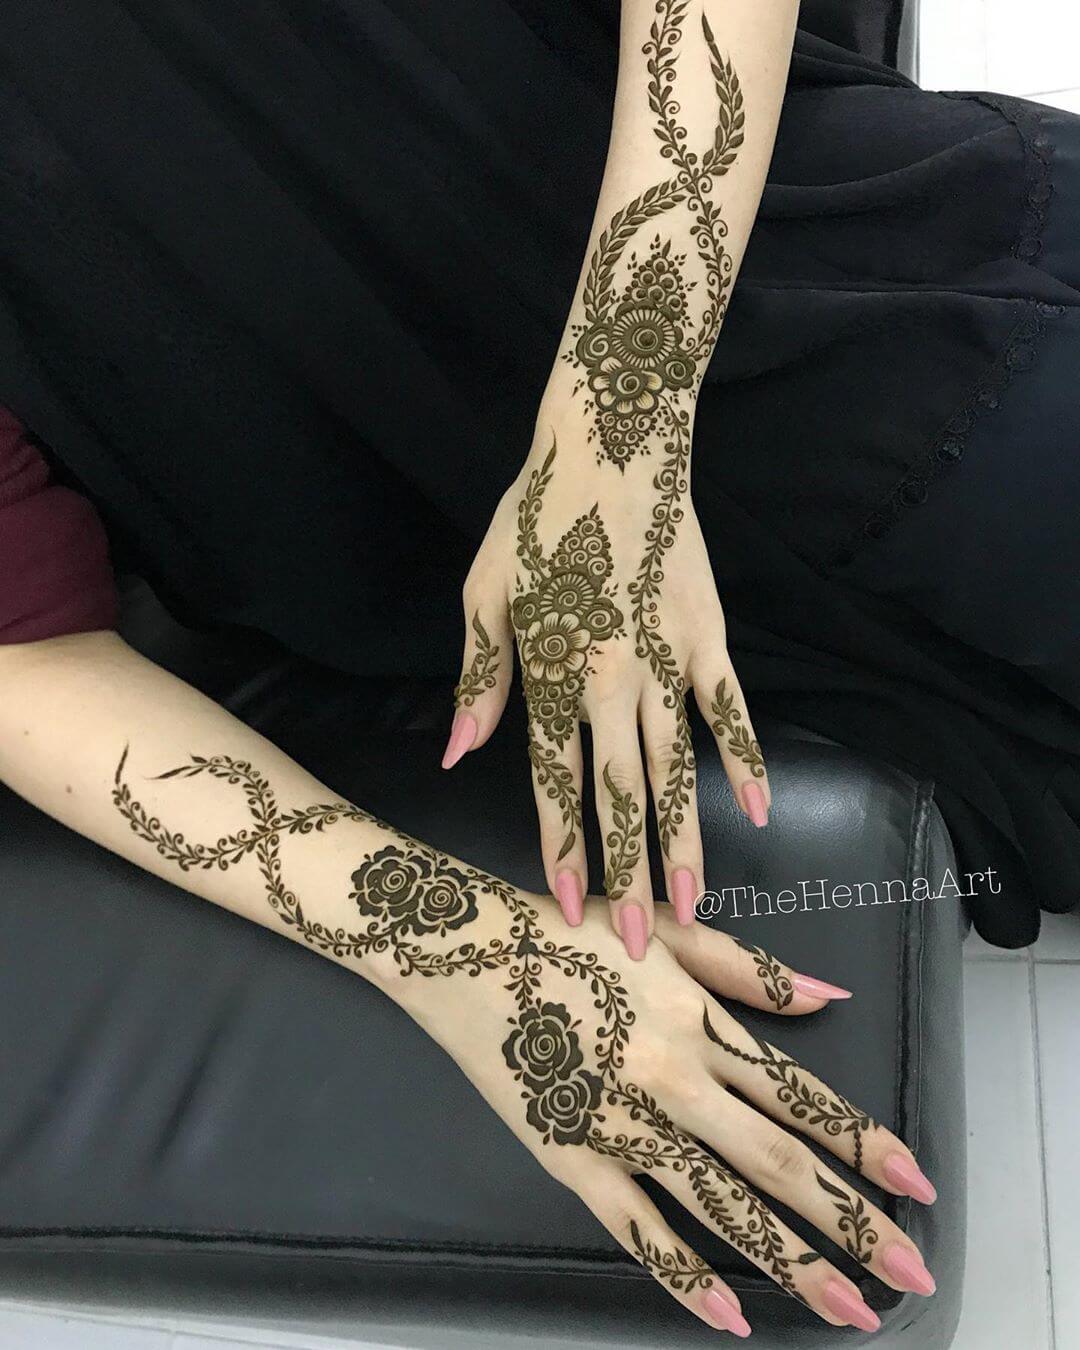 VERY BEAUTIFUL LATEST FLORAL ARABIC HENNA MEHNDI DESIGN FOR FRONT HAND -  YouTube | Mehndi designs, Henna (mehndi) design, Henna tattoo kit